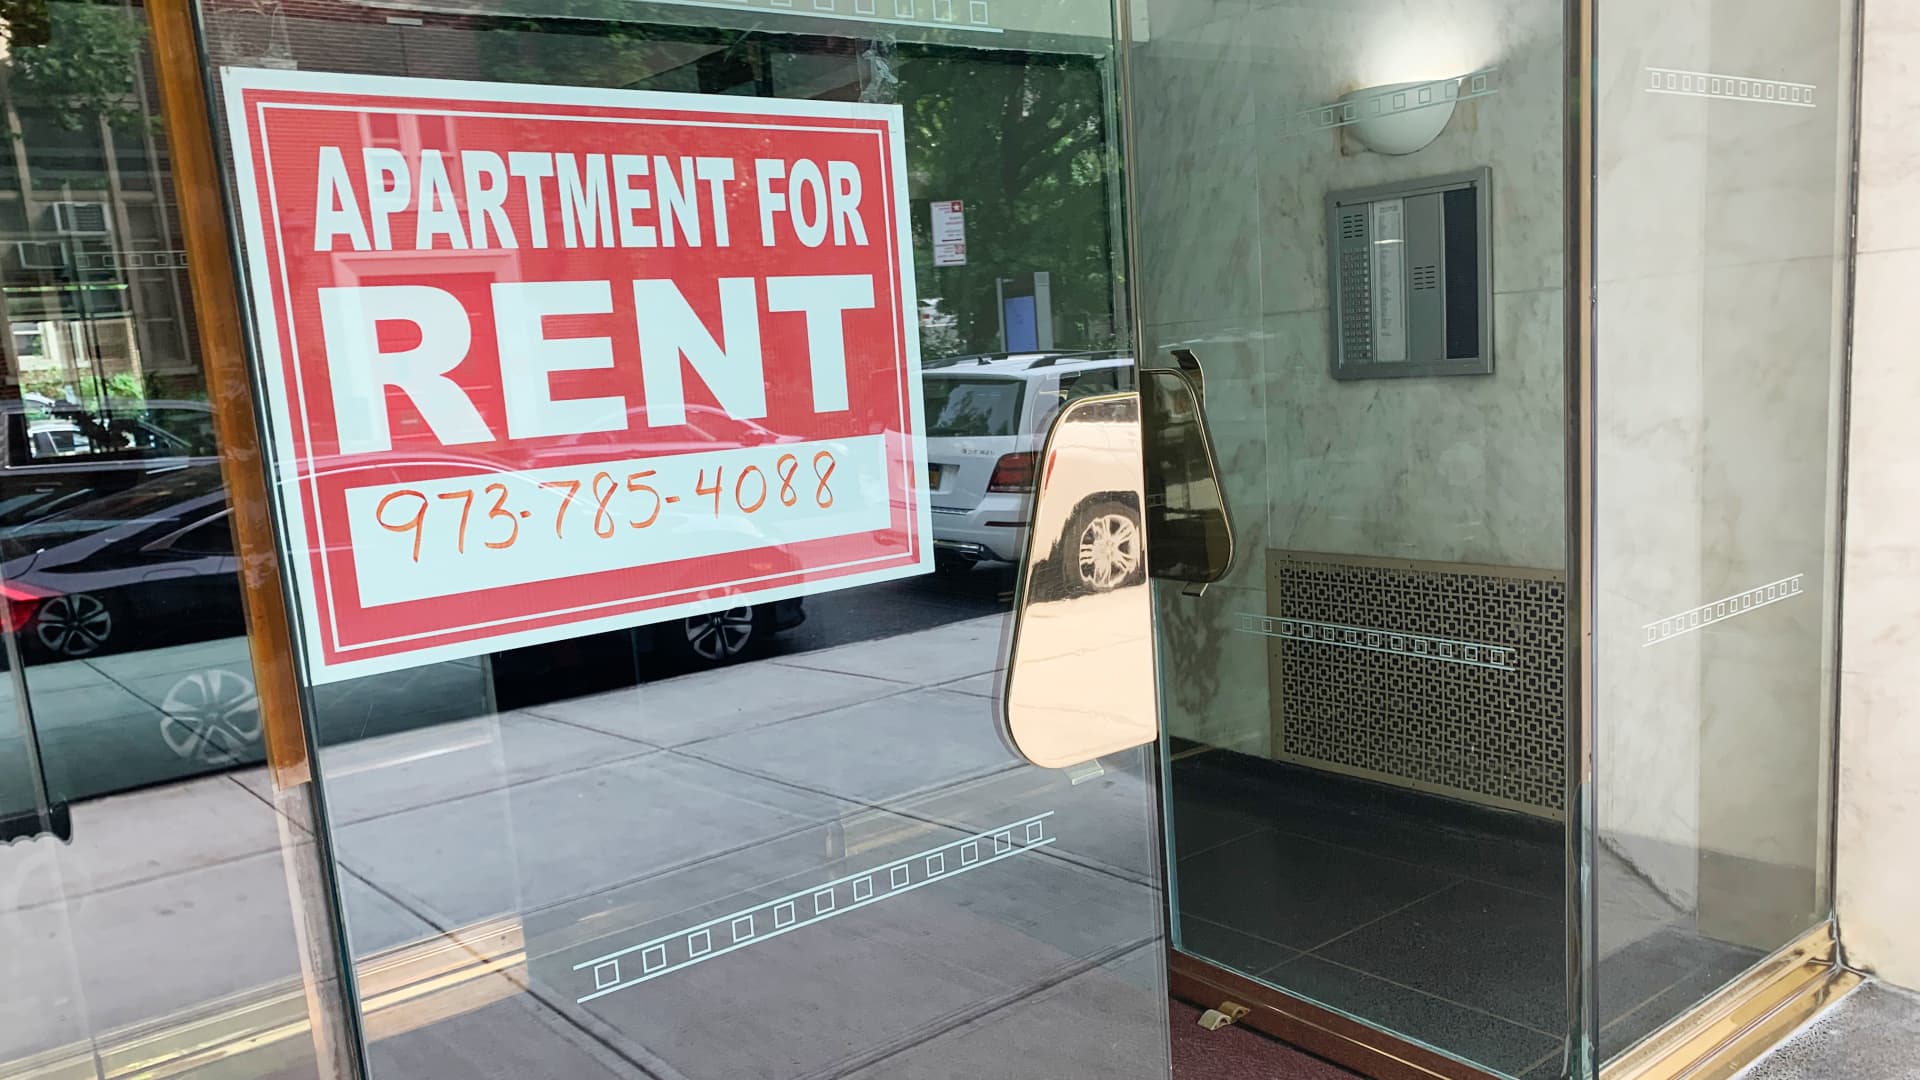 Apartment rents are finally easing after an incredible run. Here’s how to play it